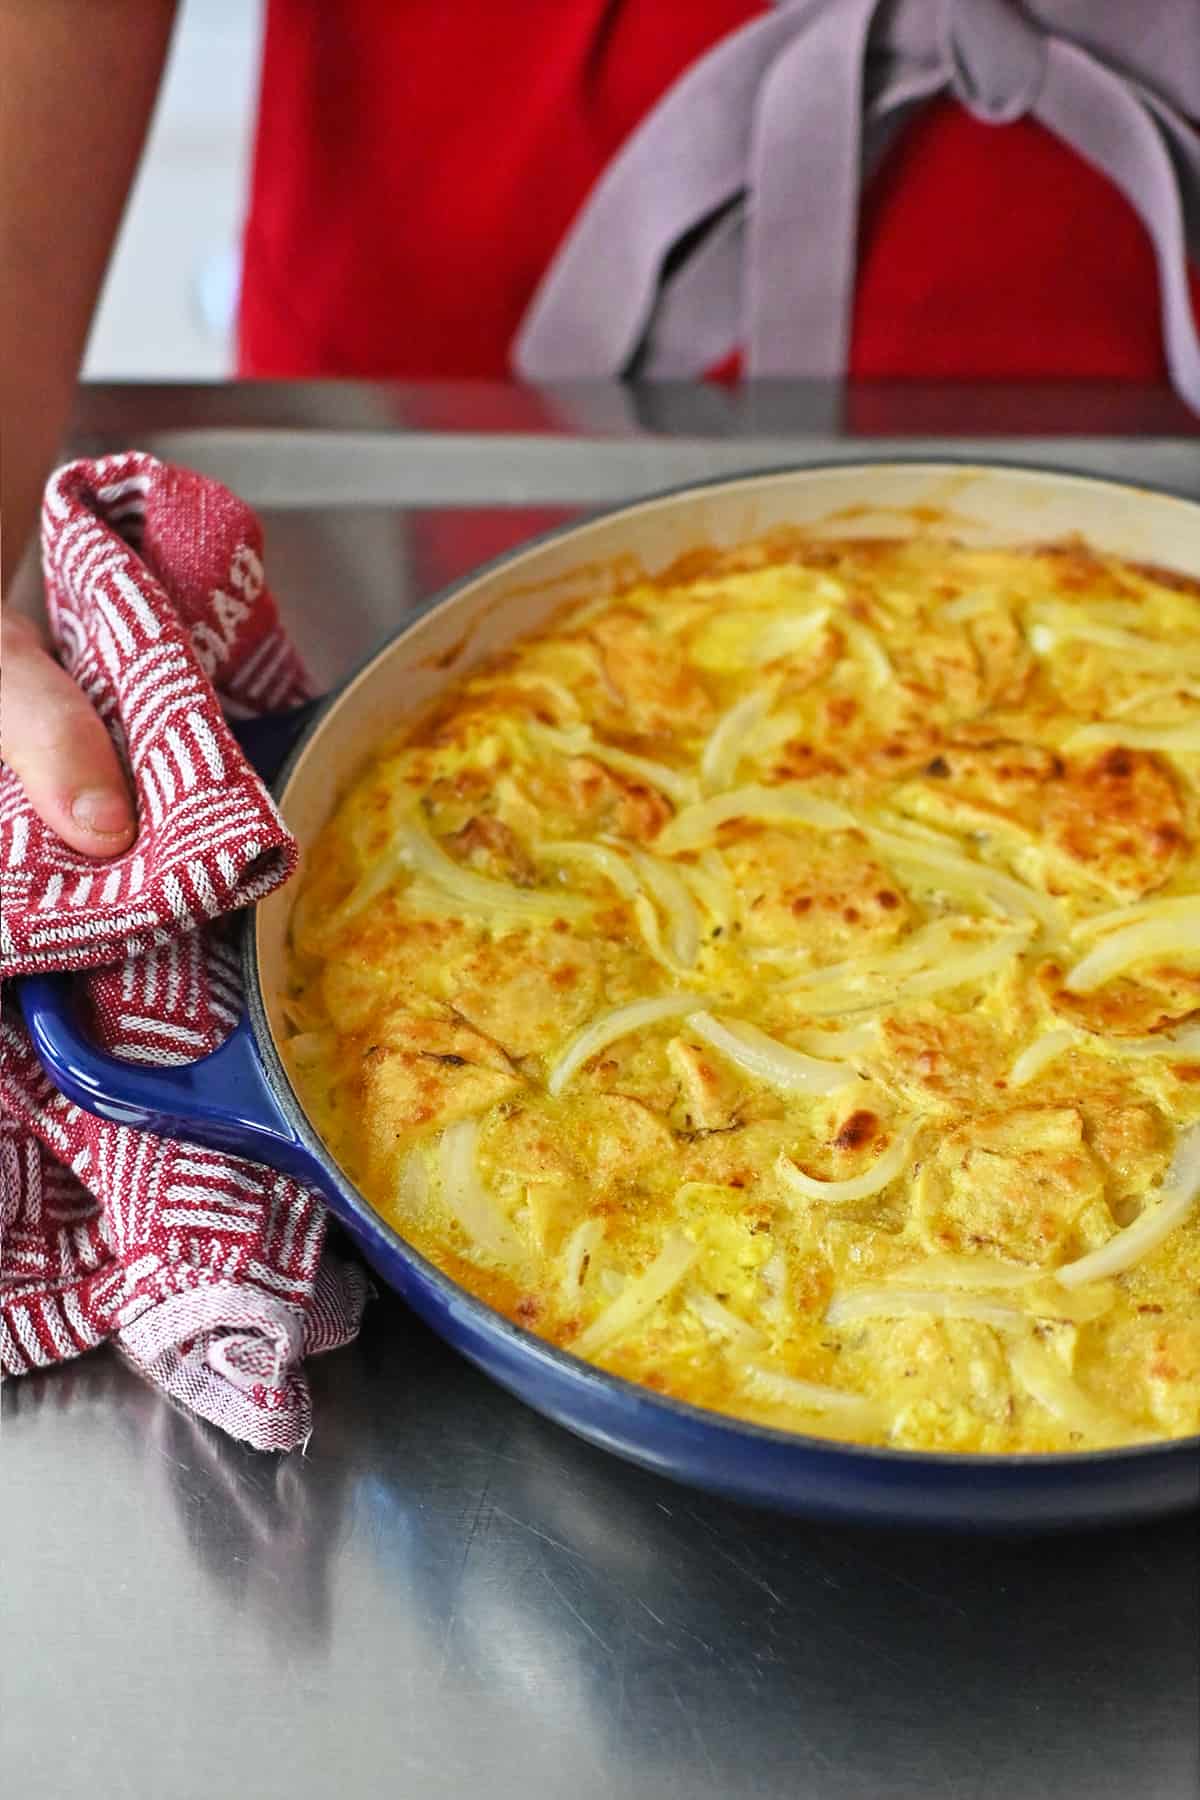 A fully cooked Spanish tortilla made with potato chips, ready to serve.